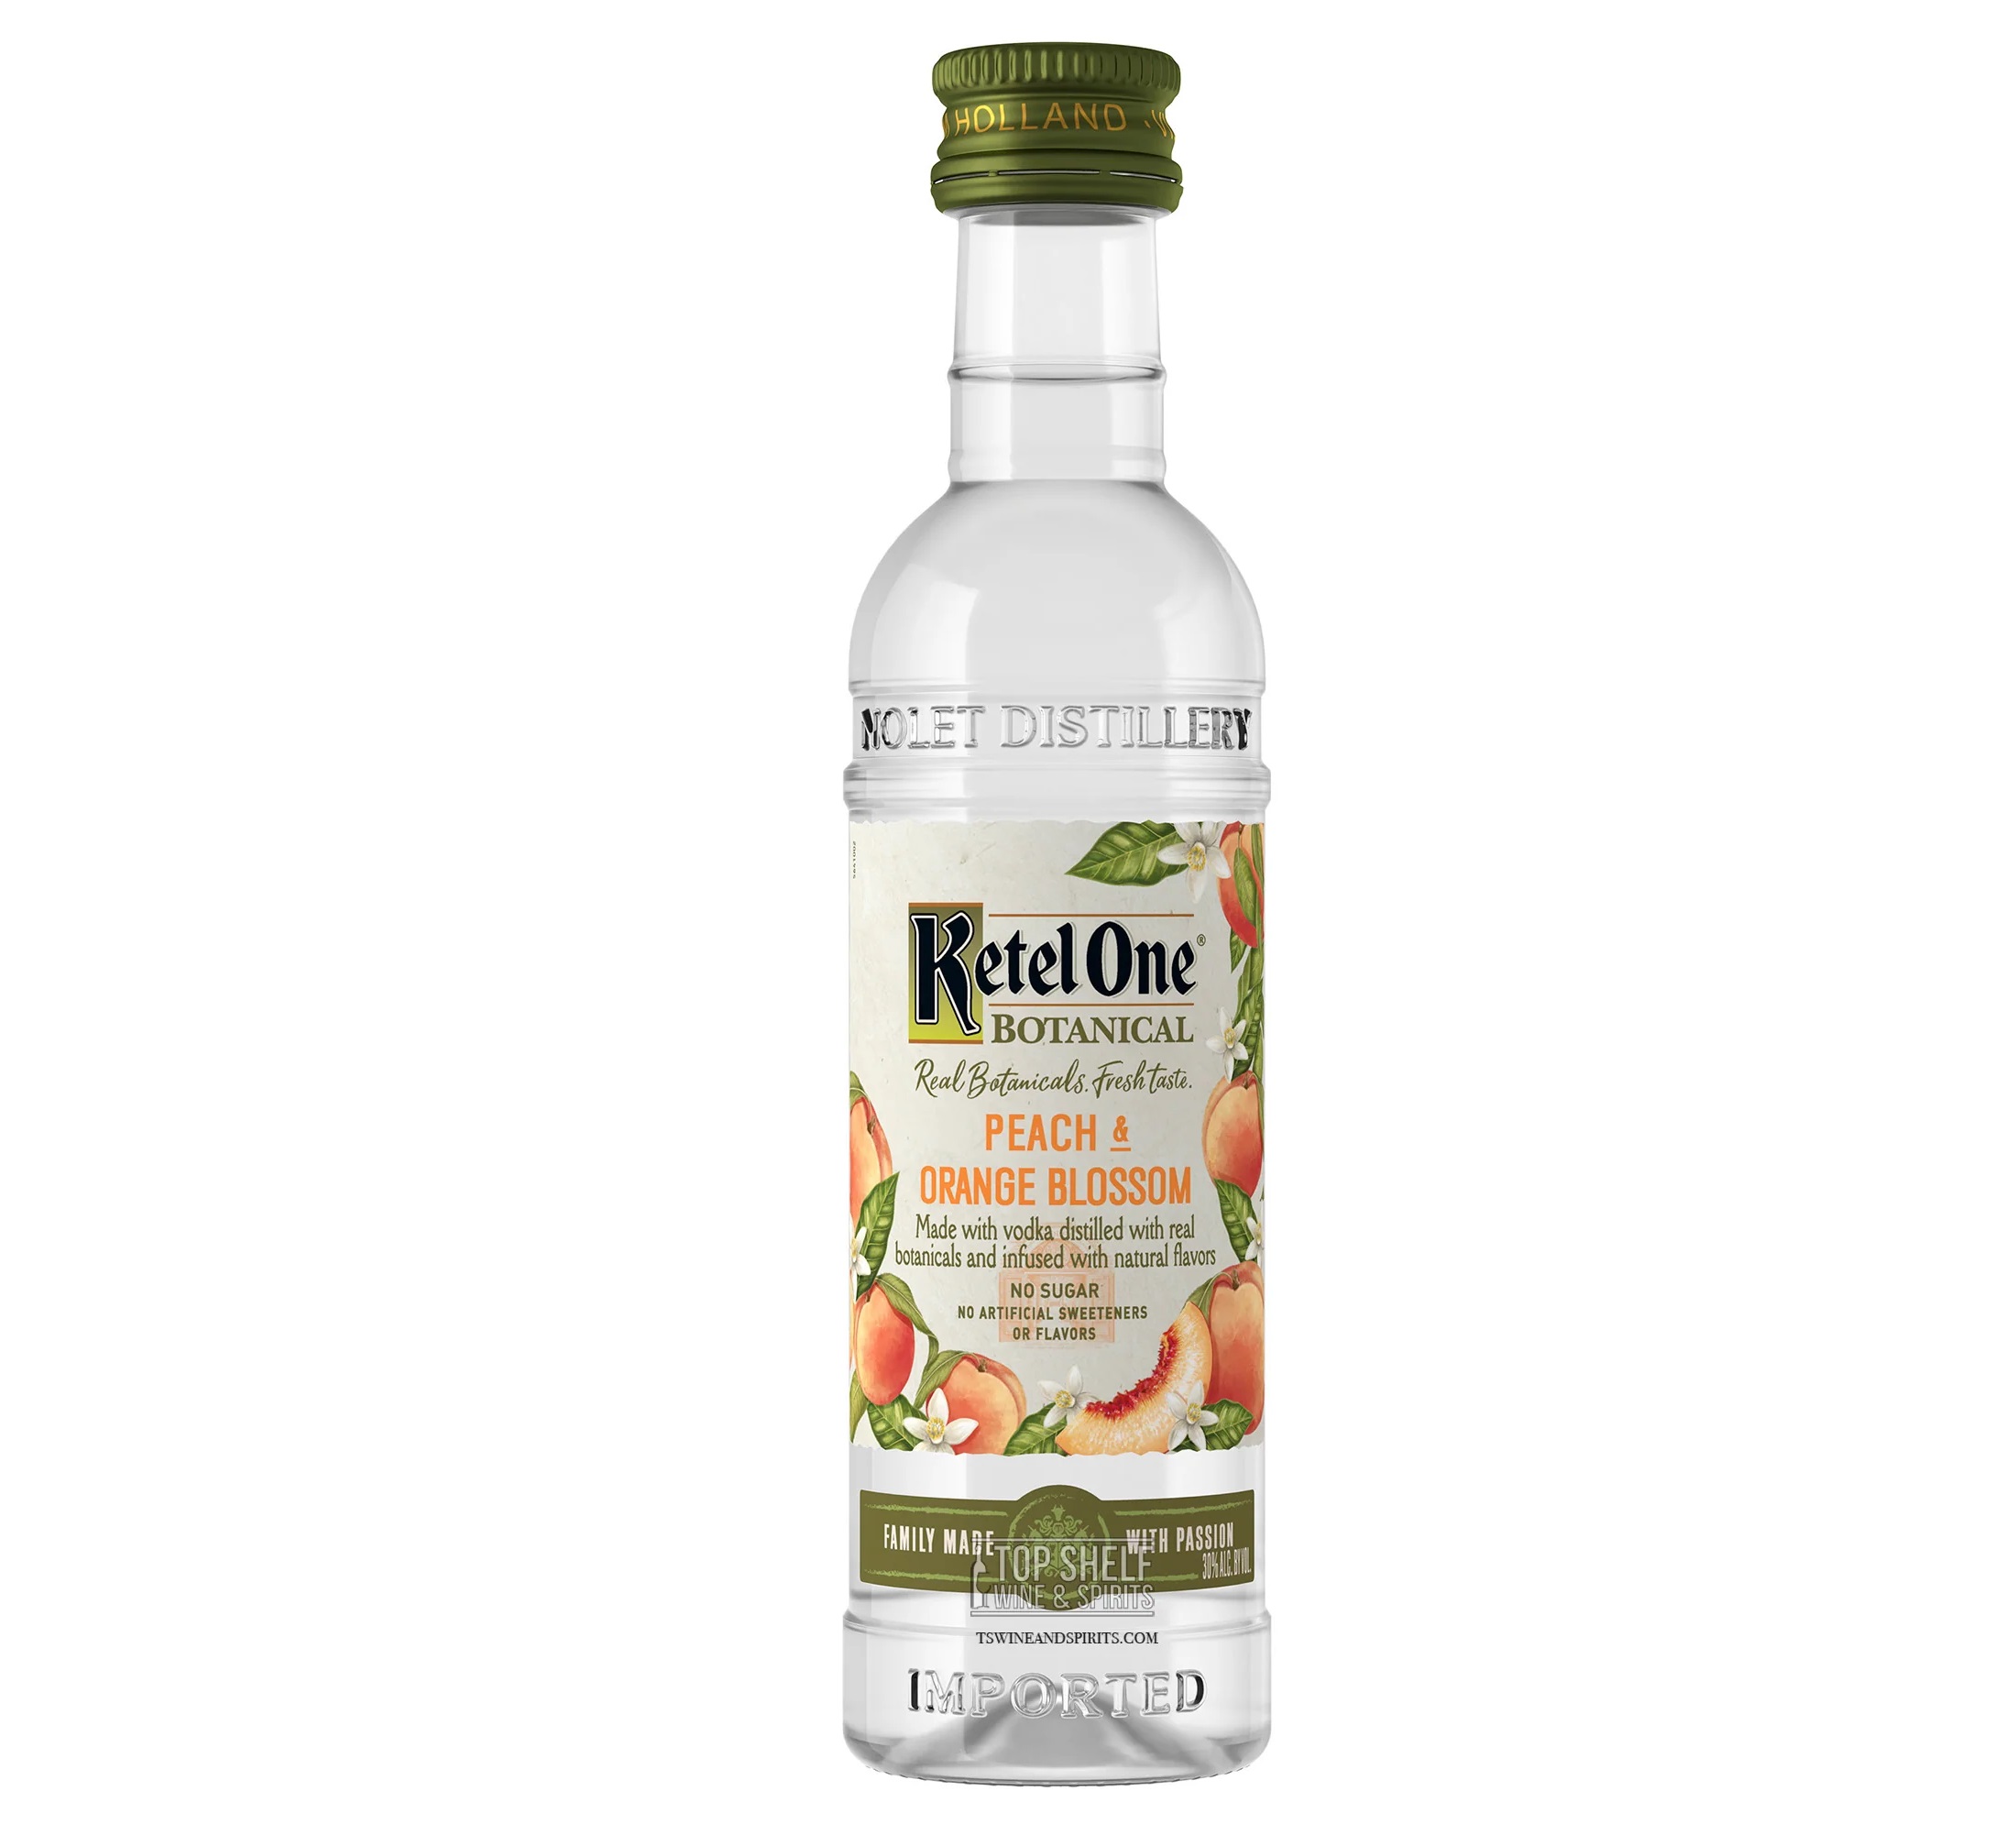 11-ketel-one-botanicals-nutrition-facts